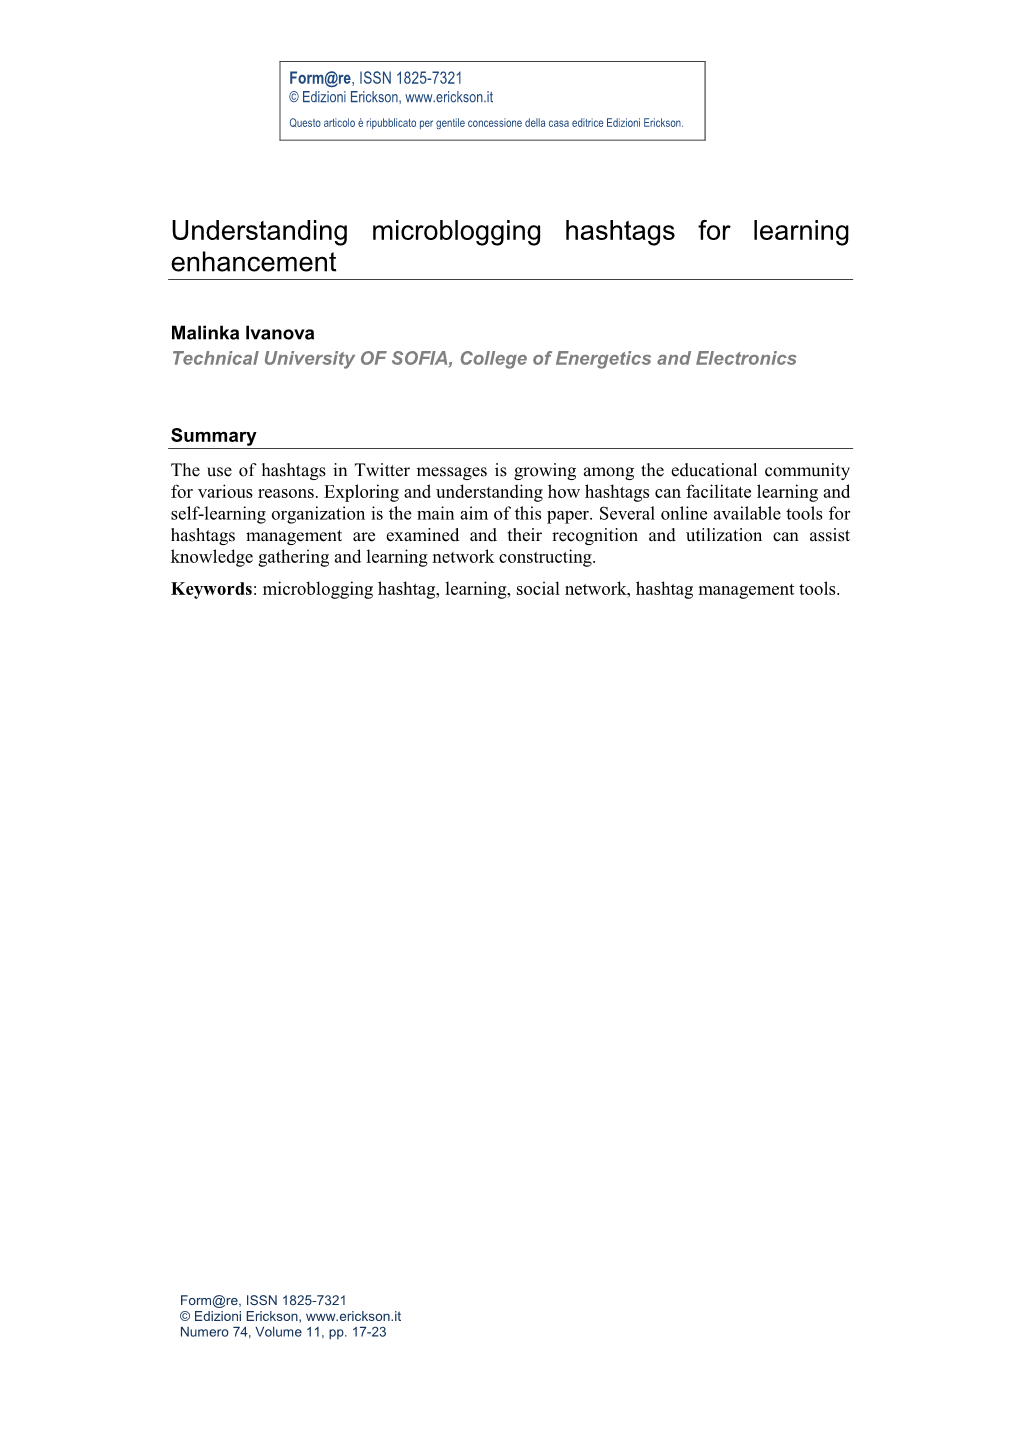 Understanding Microblogging Hashtags for Learning Enhancement